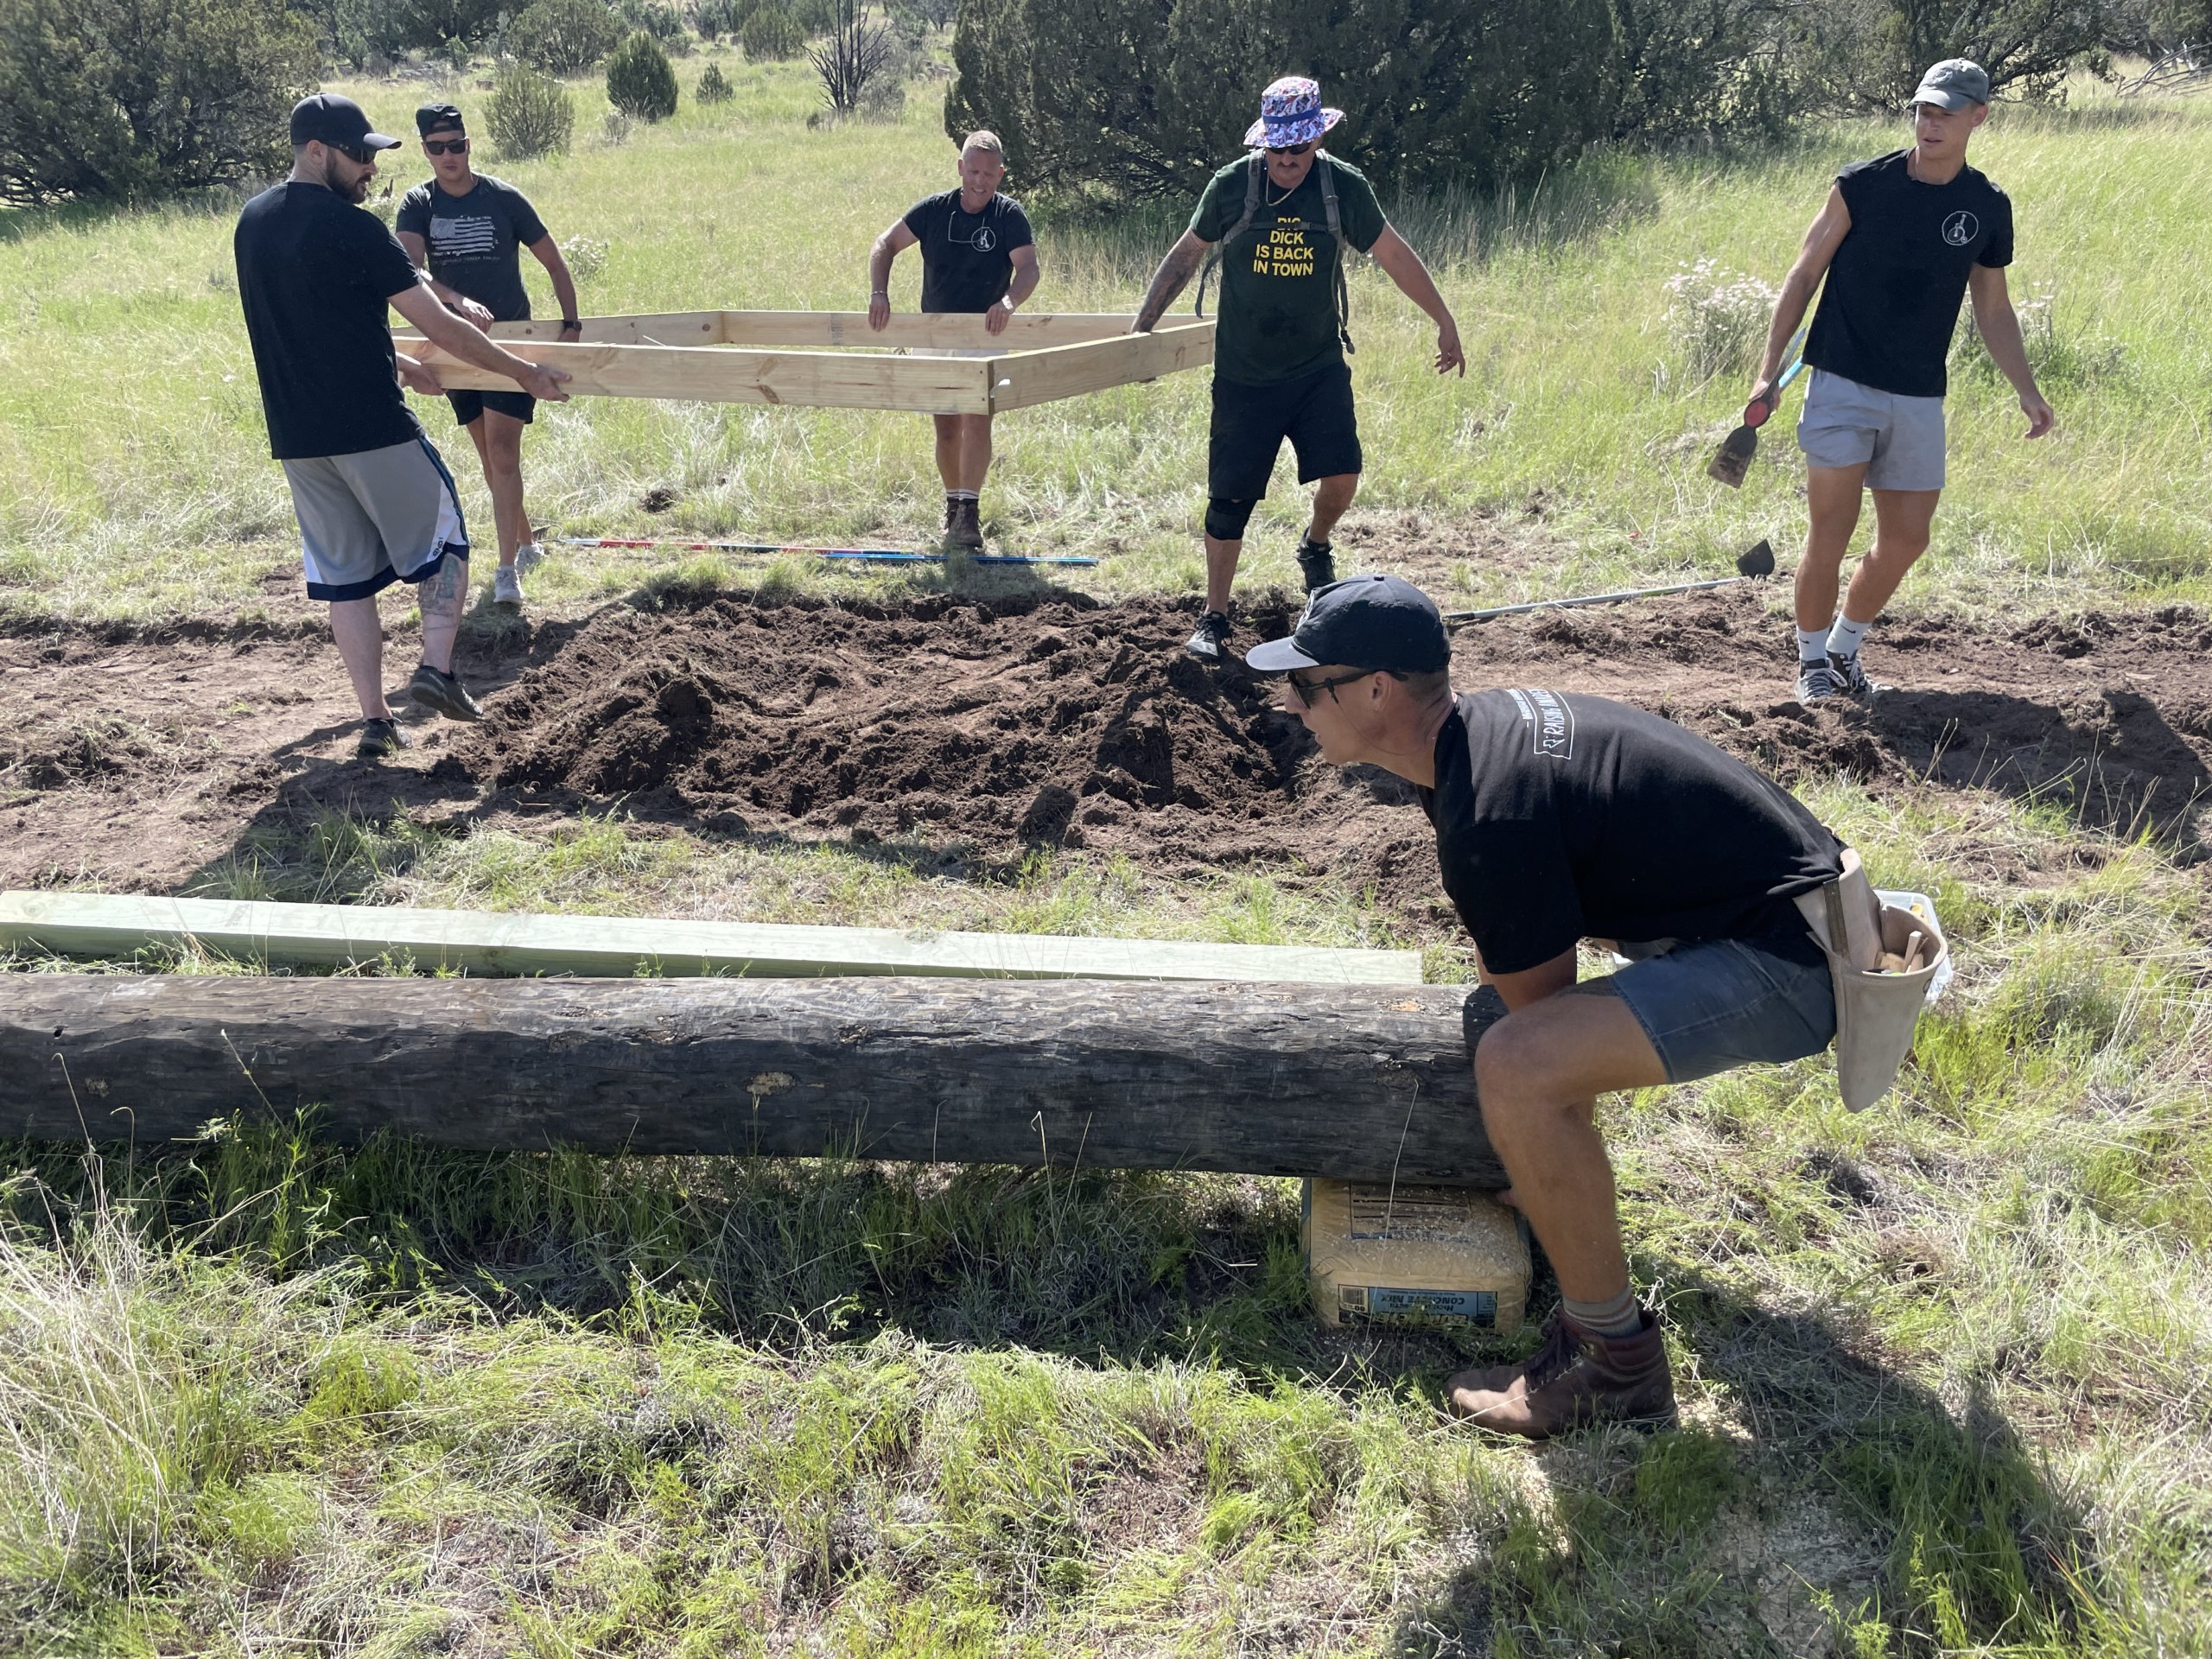 Dawgpatch Bandits helped build an outdoor gym at Strongpoint Theinert Ranch